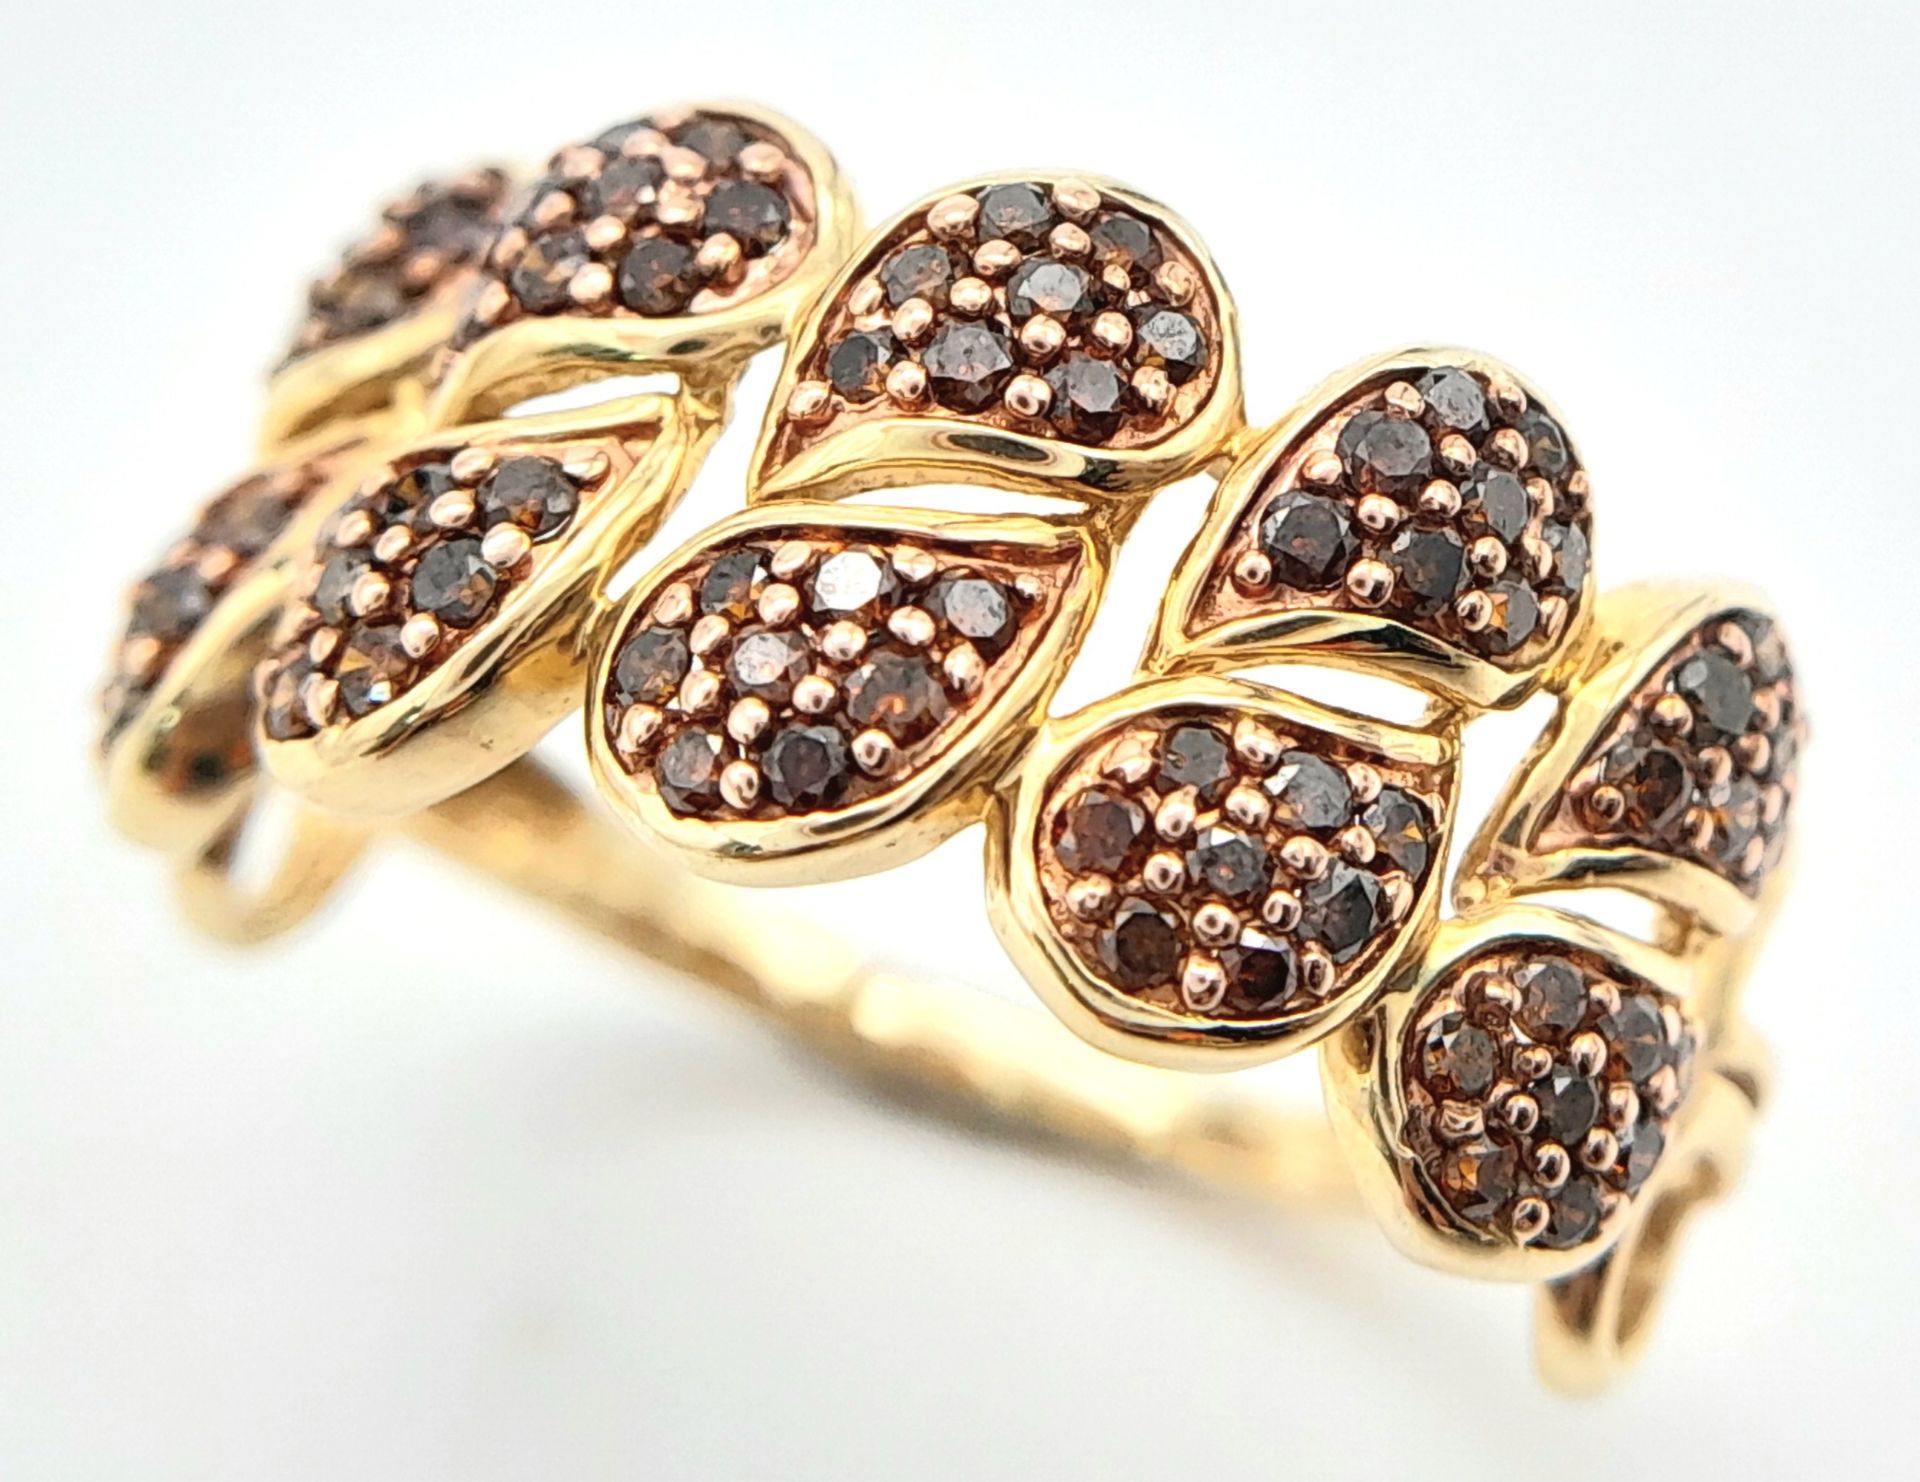 A 9K YELLOW GOLD COLOURED DIAMOND SET RING. 0.80ctw, Size N, 2.2g total weight. Ref: SC 8036 - Image 5 of 7